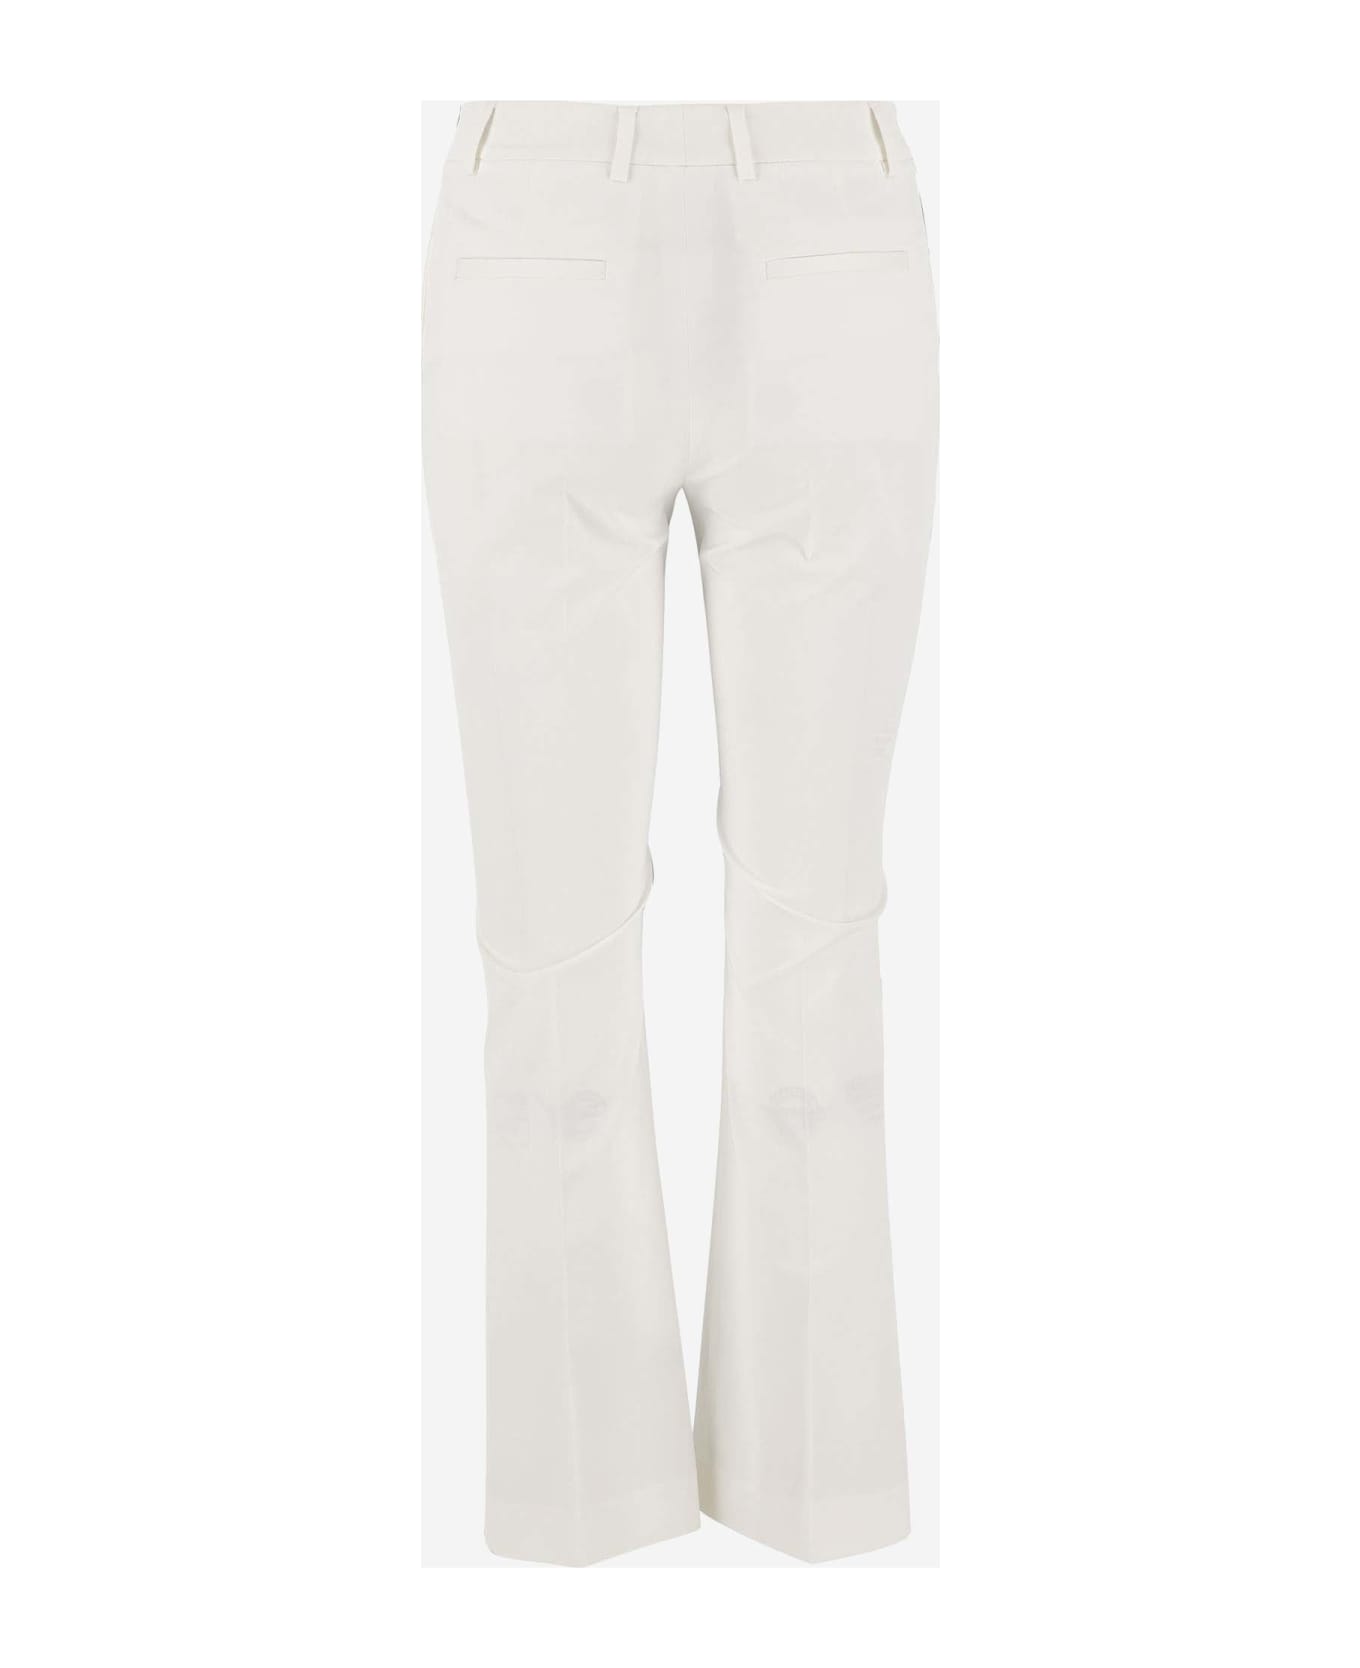 QL2 Stretch Cotton Flared Pants - White ボトムス